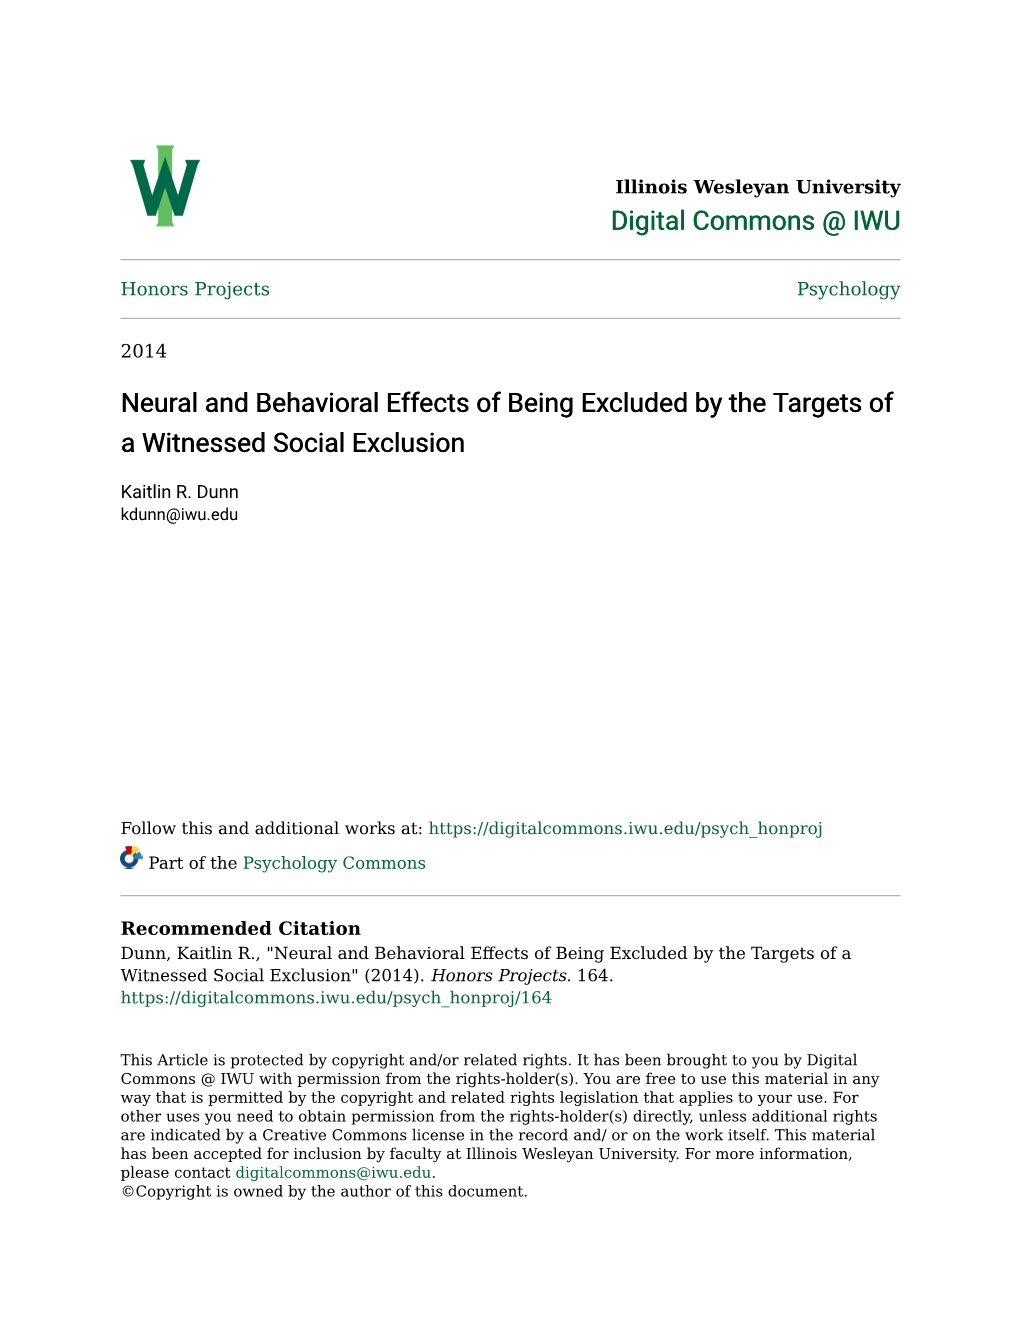 Neural and Behavioral Effects of Being Excluded by the Targets of a Witnessed Social Exclusion